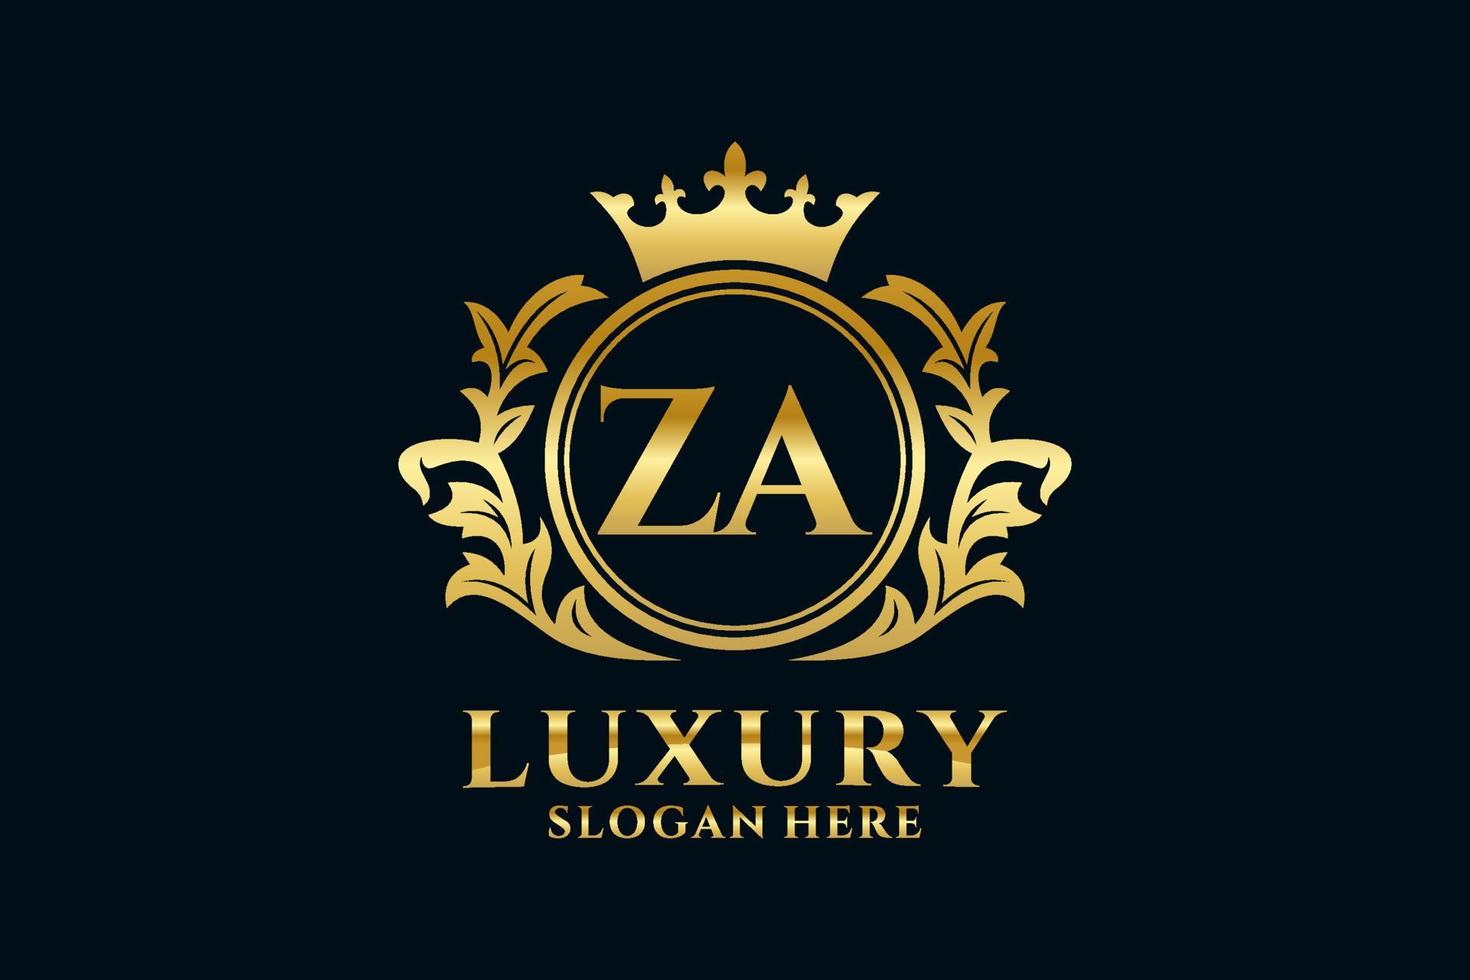 Initial ZA Letter Royal Luxury Logo template in vector art for luxurious branding projects and other vector illustration.